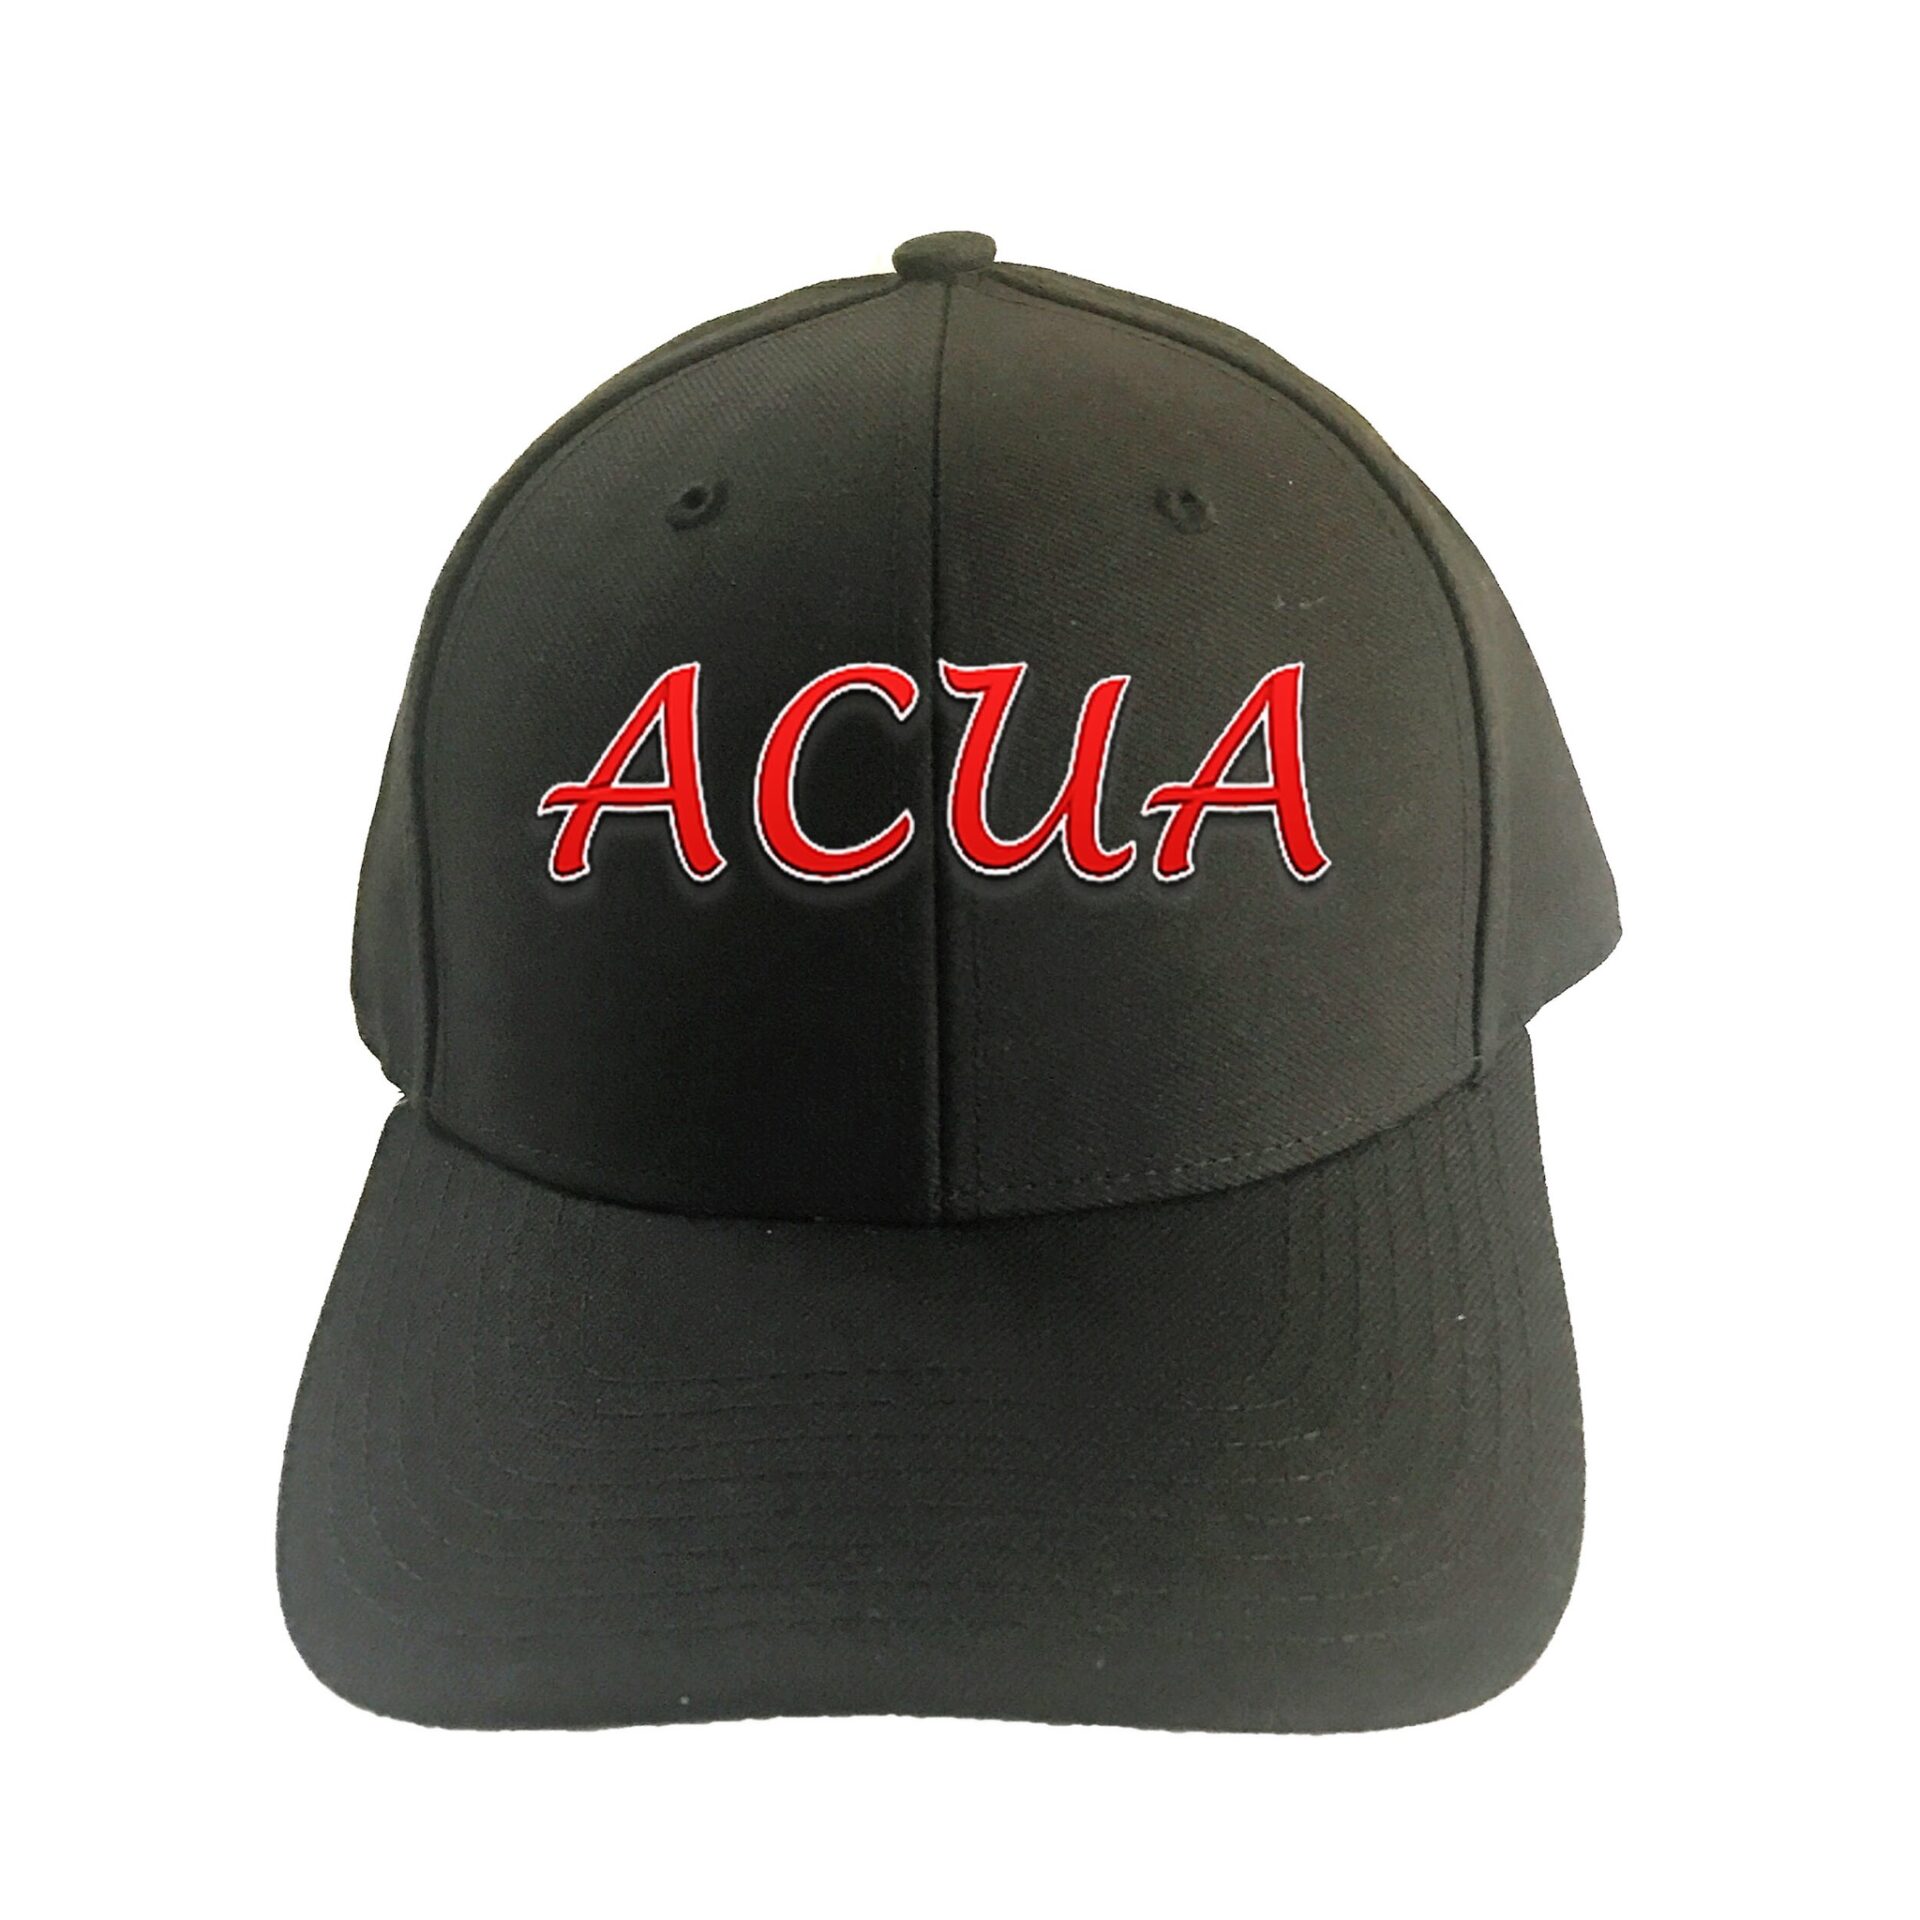 A black hat with the word " agua " embroidered on it.